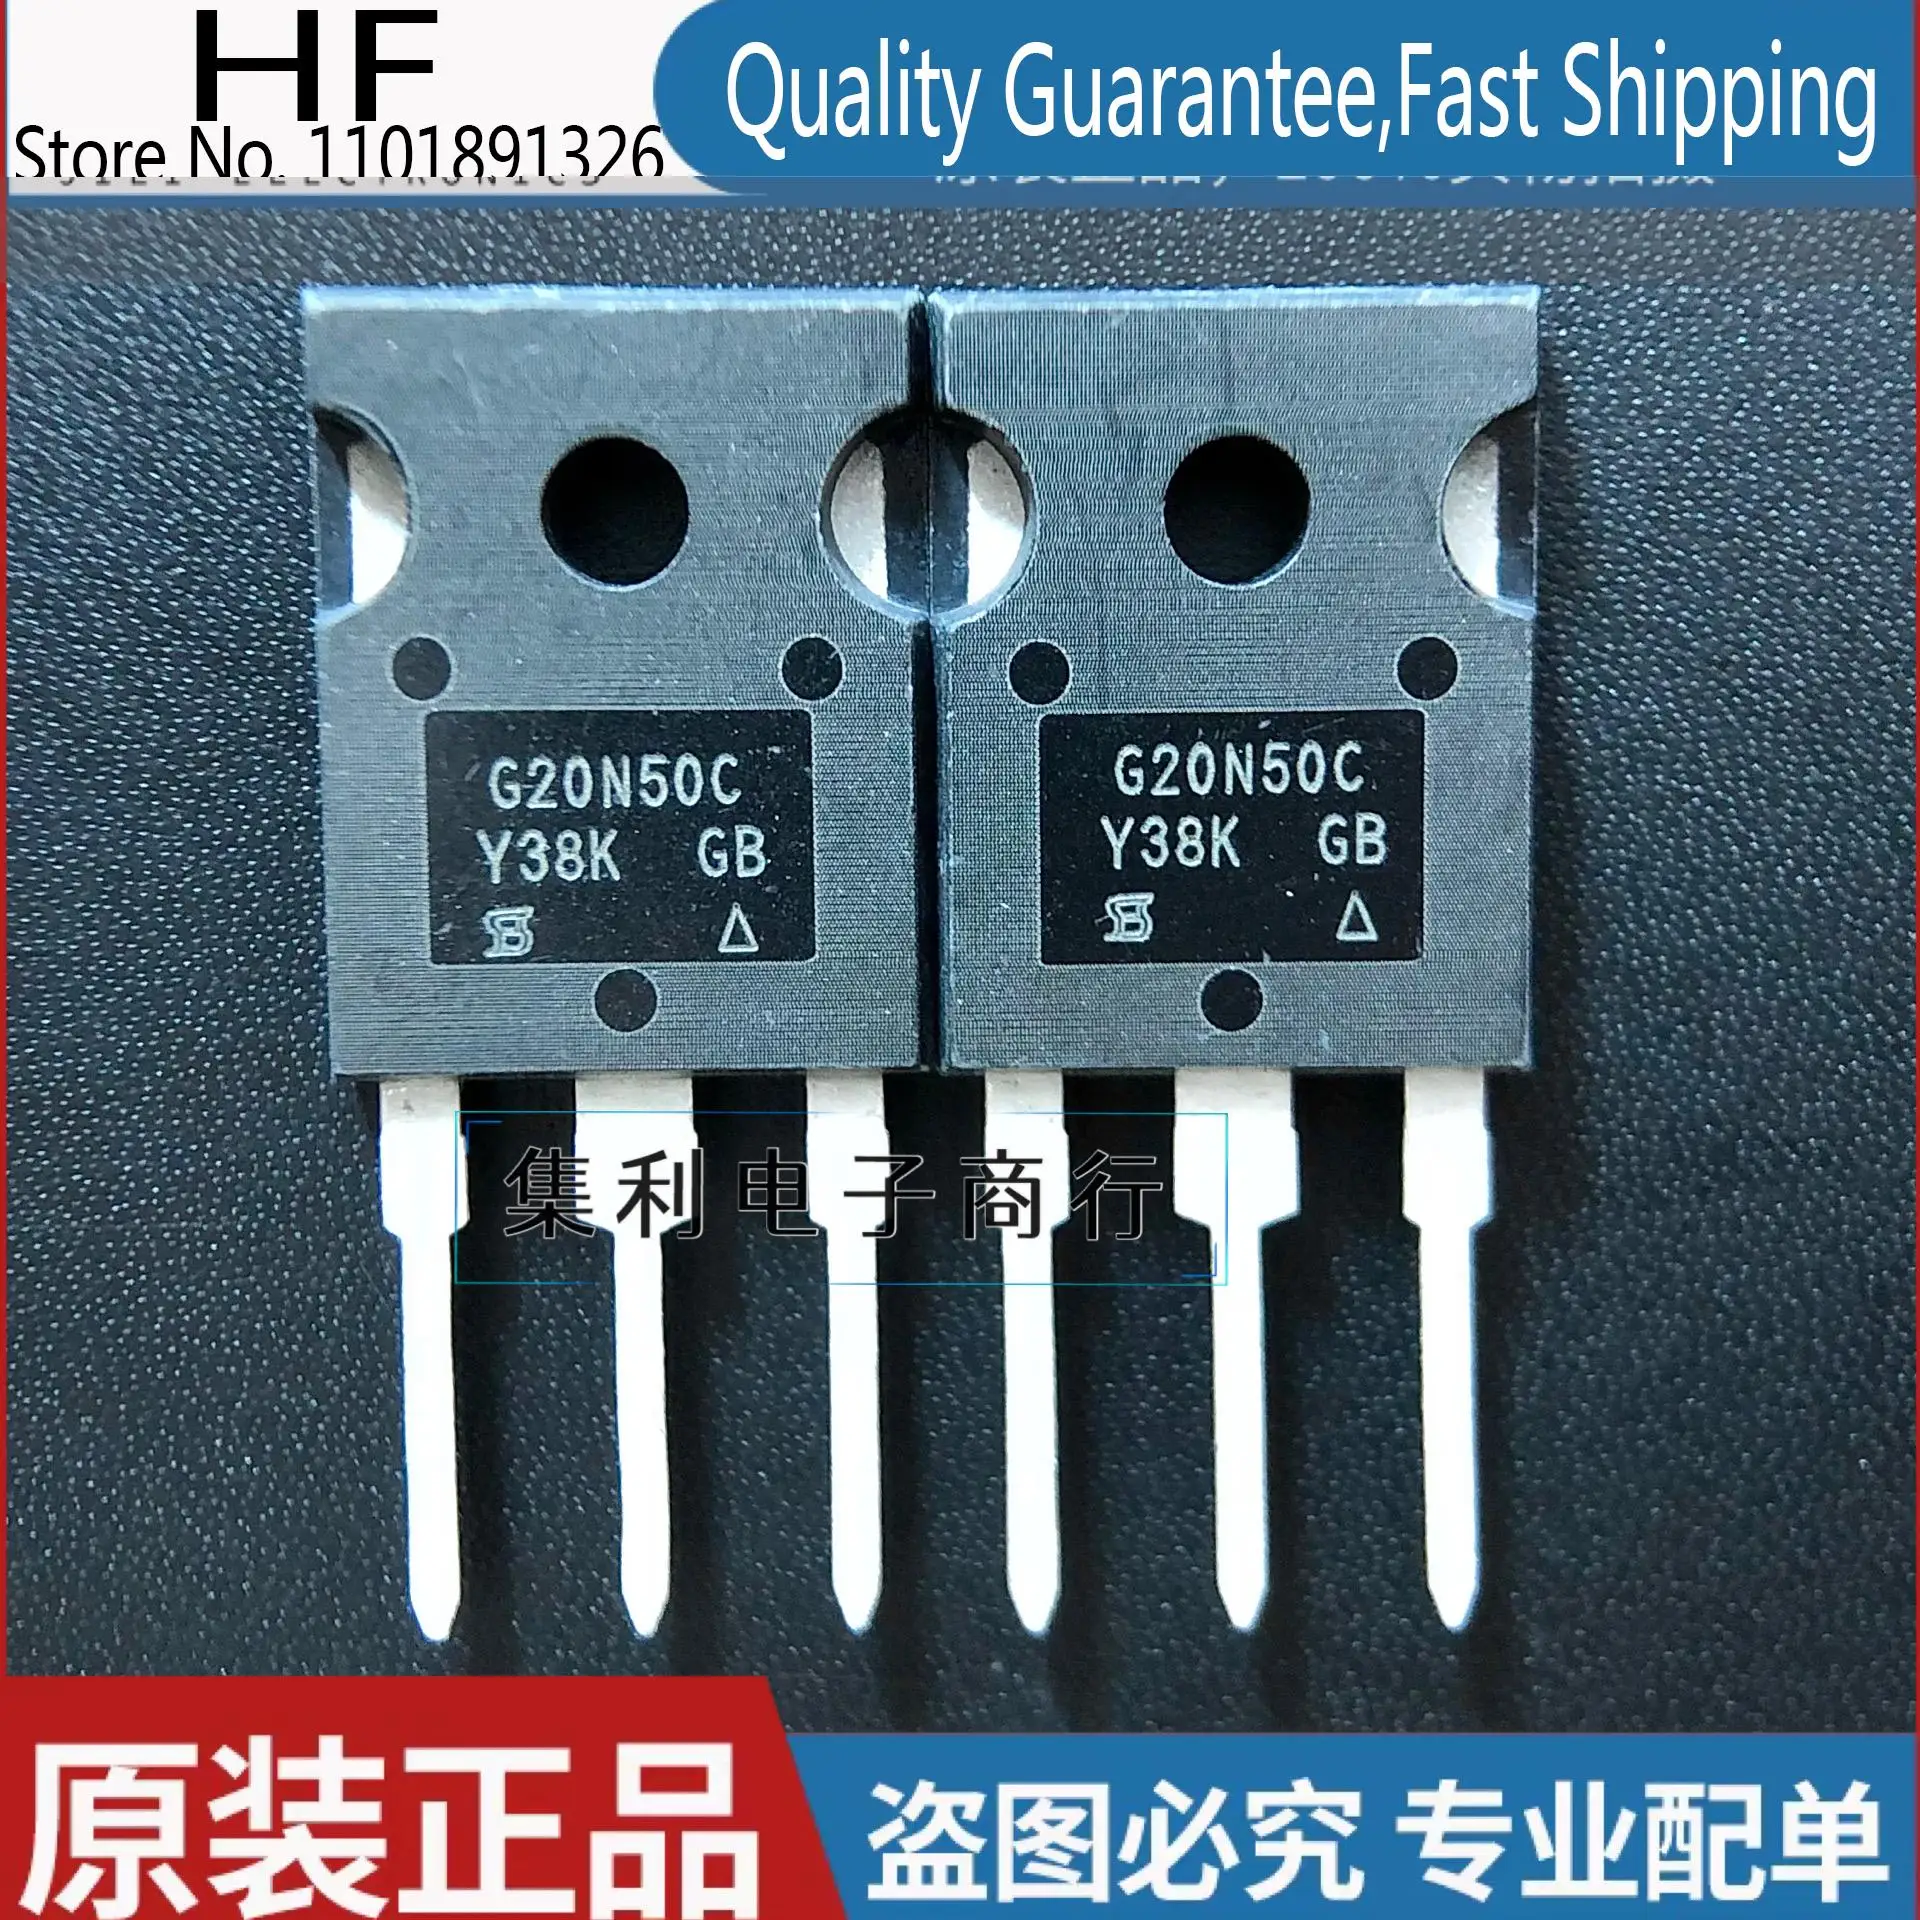 

10PCS/lot G20N50C SIHG20N50C TO-247 20A 500V MOS Imported Original In Stock Fast Shipping Quality Guarantee